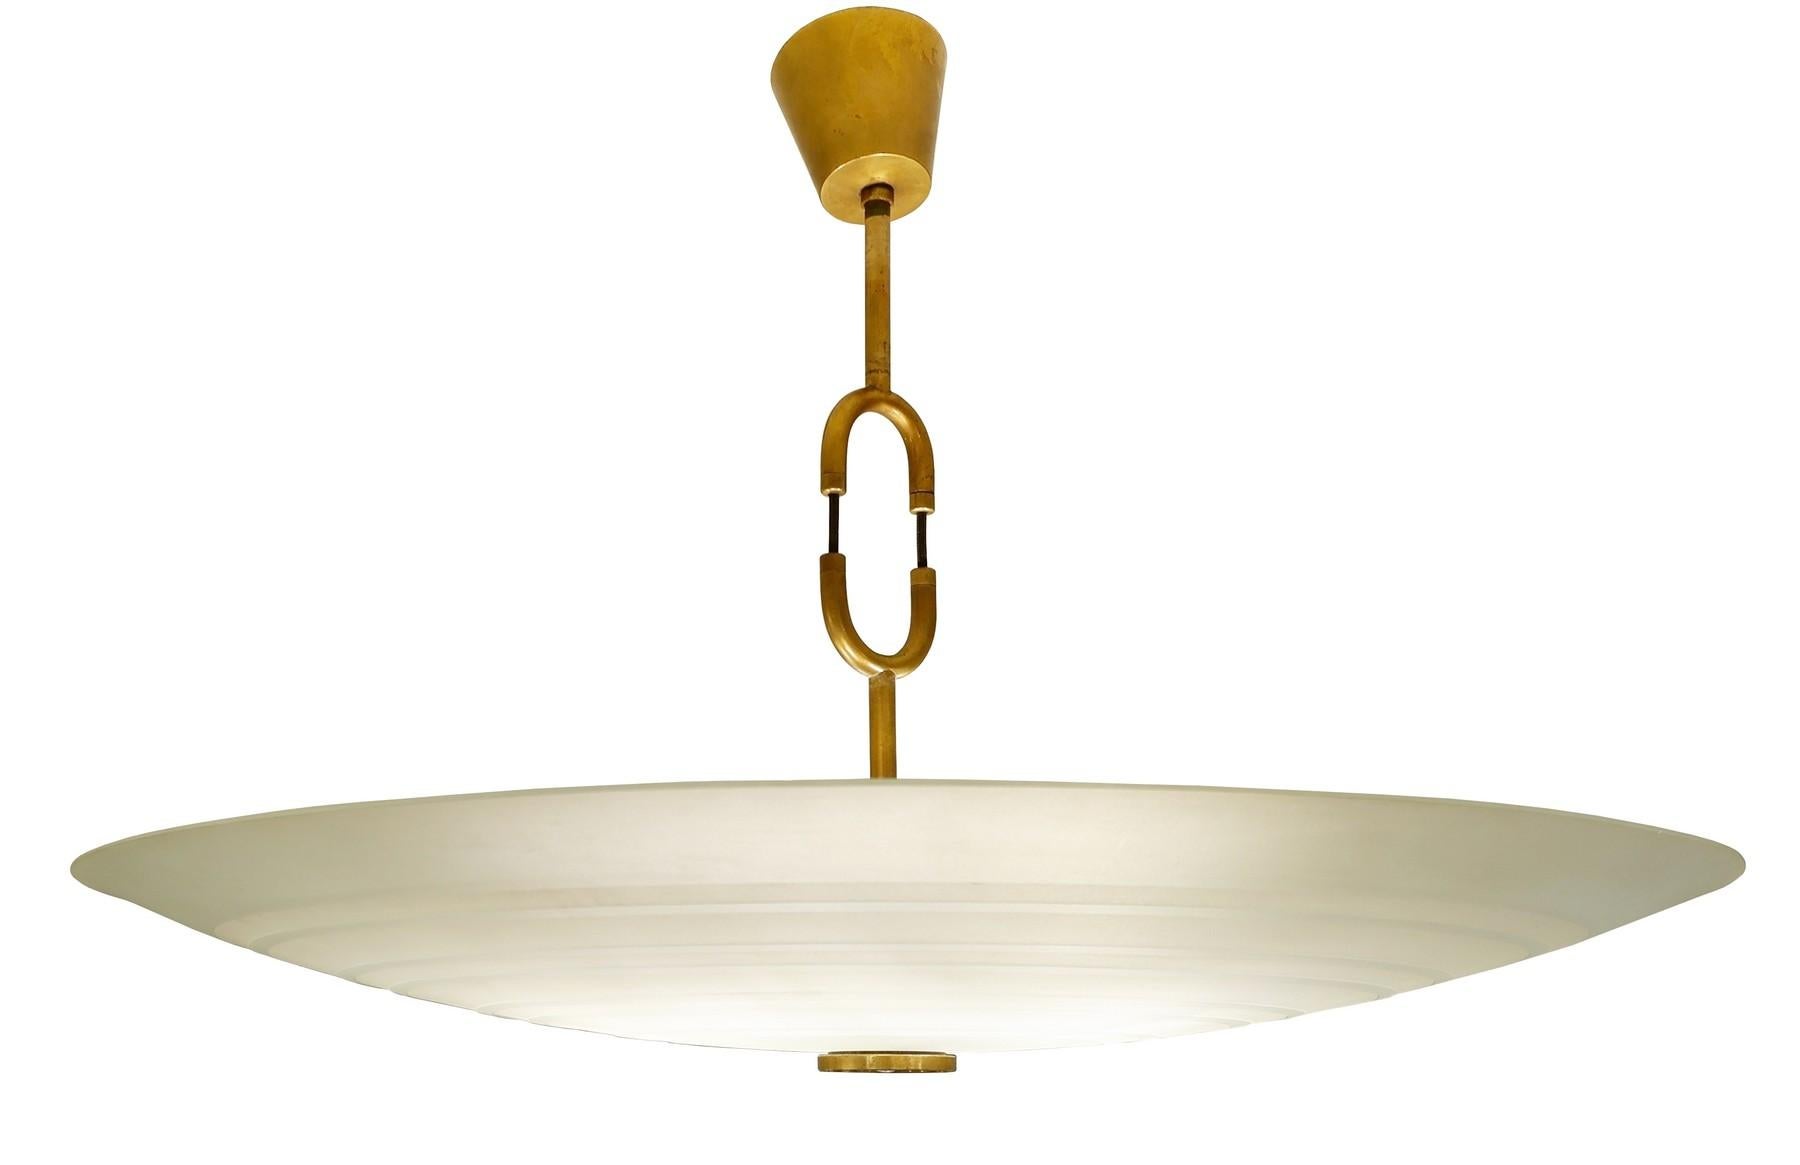 Pietro Chiesa disk chandelier for Fontana Arte, circa 1936

The height is ajustable.